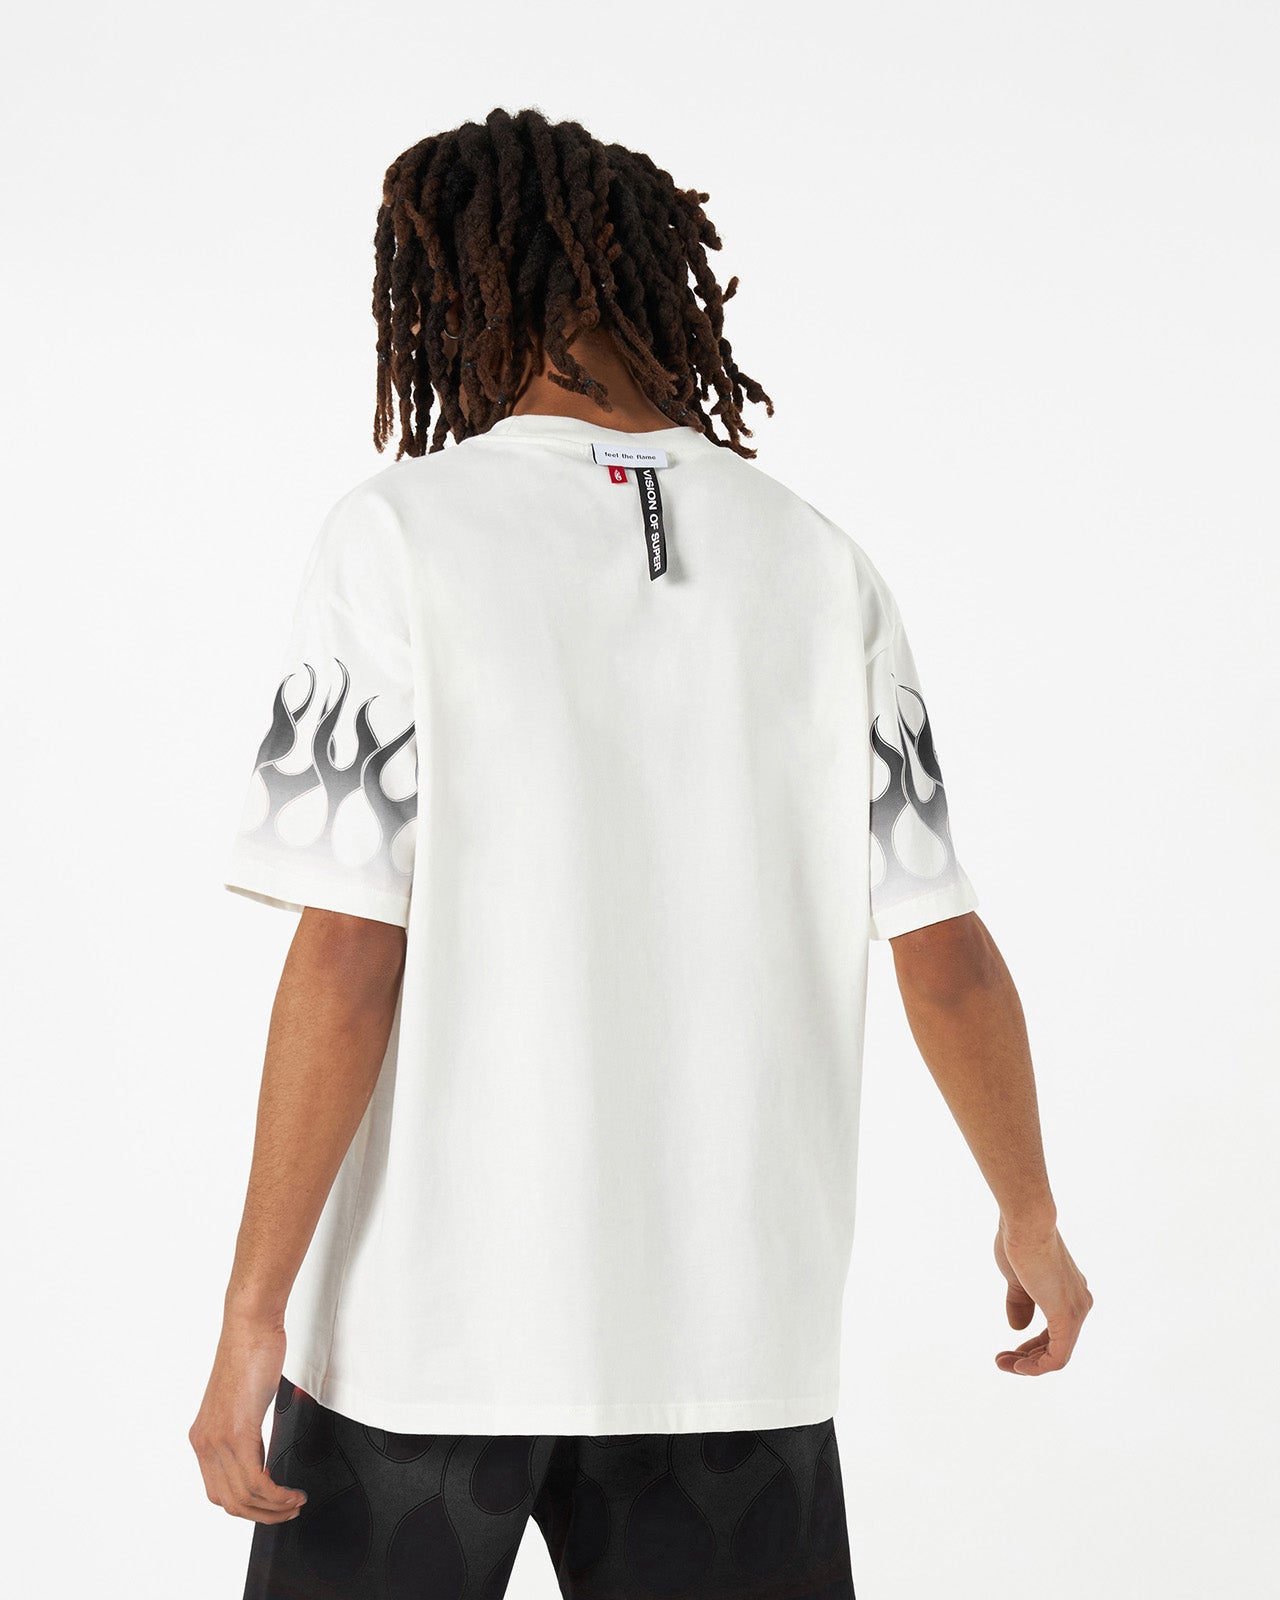 WHITE T-SHIRT WITH BLACK FLAMES